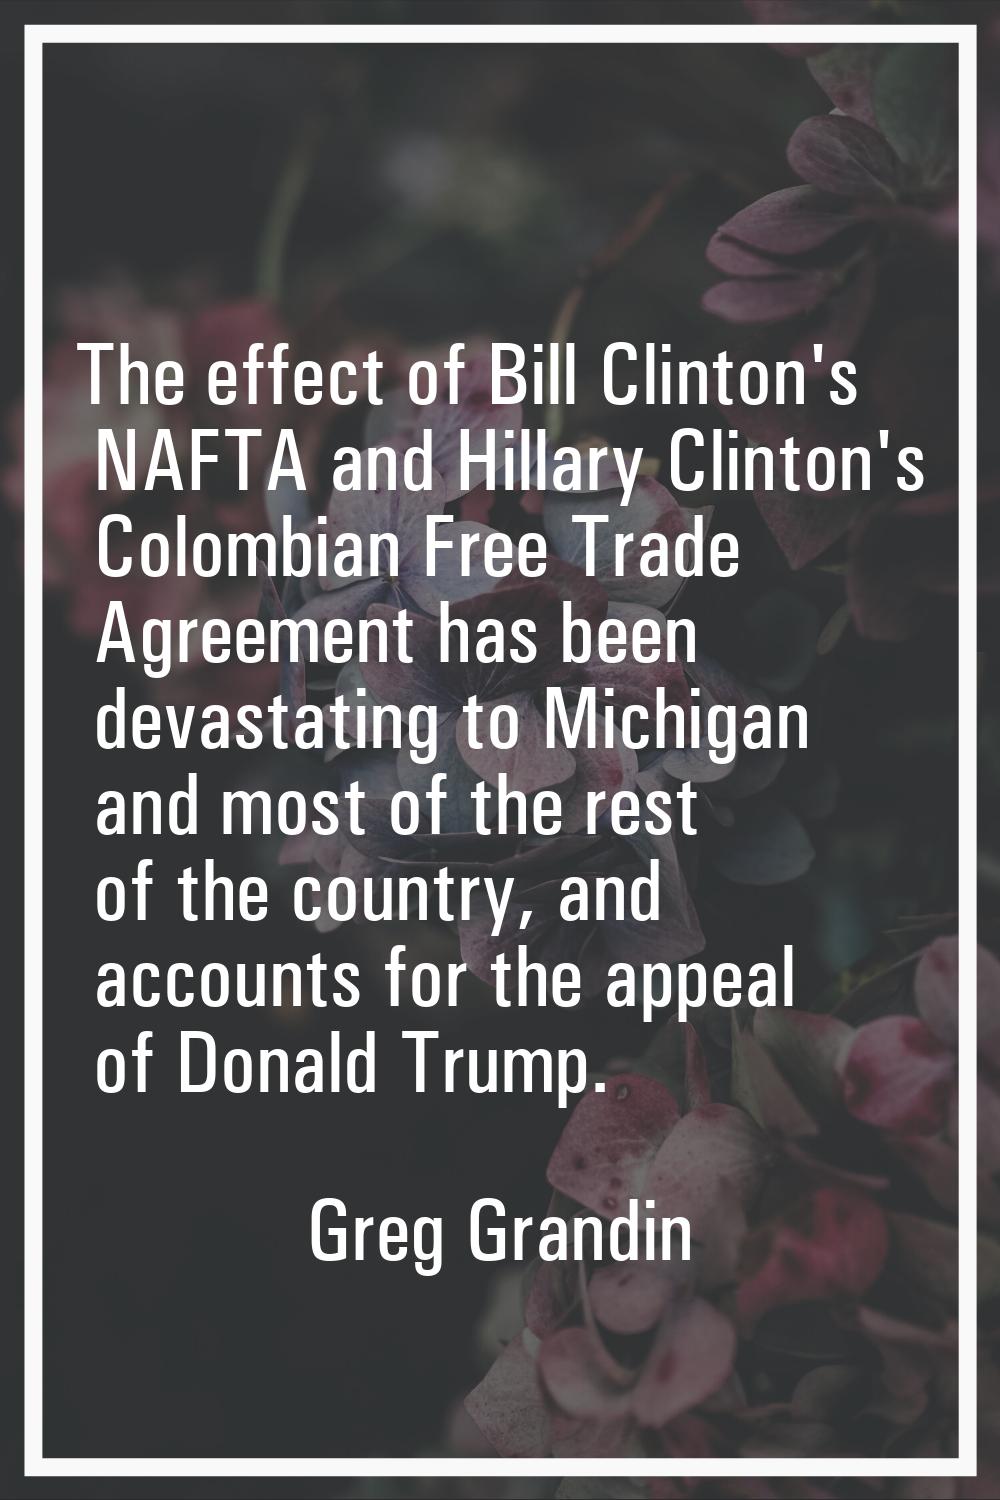 The effect of Bill Clinton's NAFTA and Hillary Clinton's Colombian Free Trade Agreement has been de